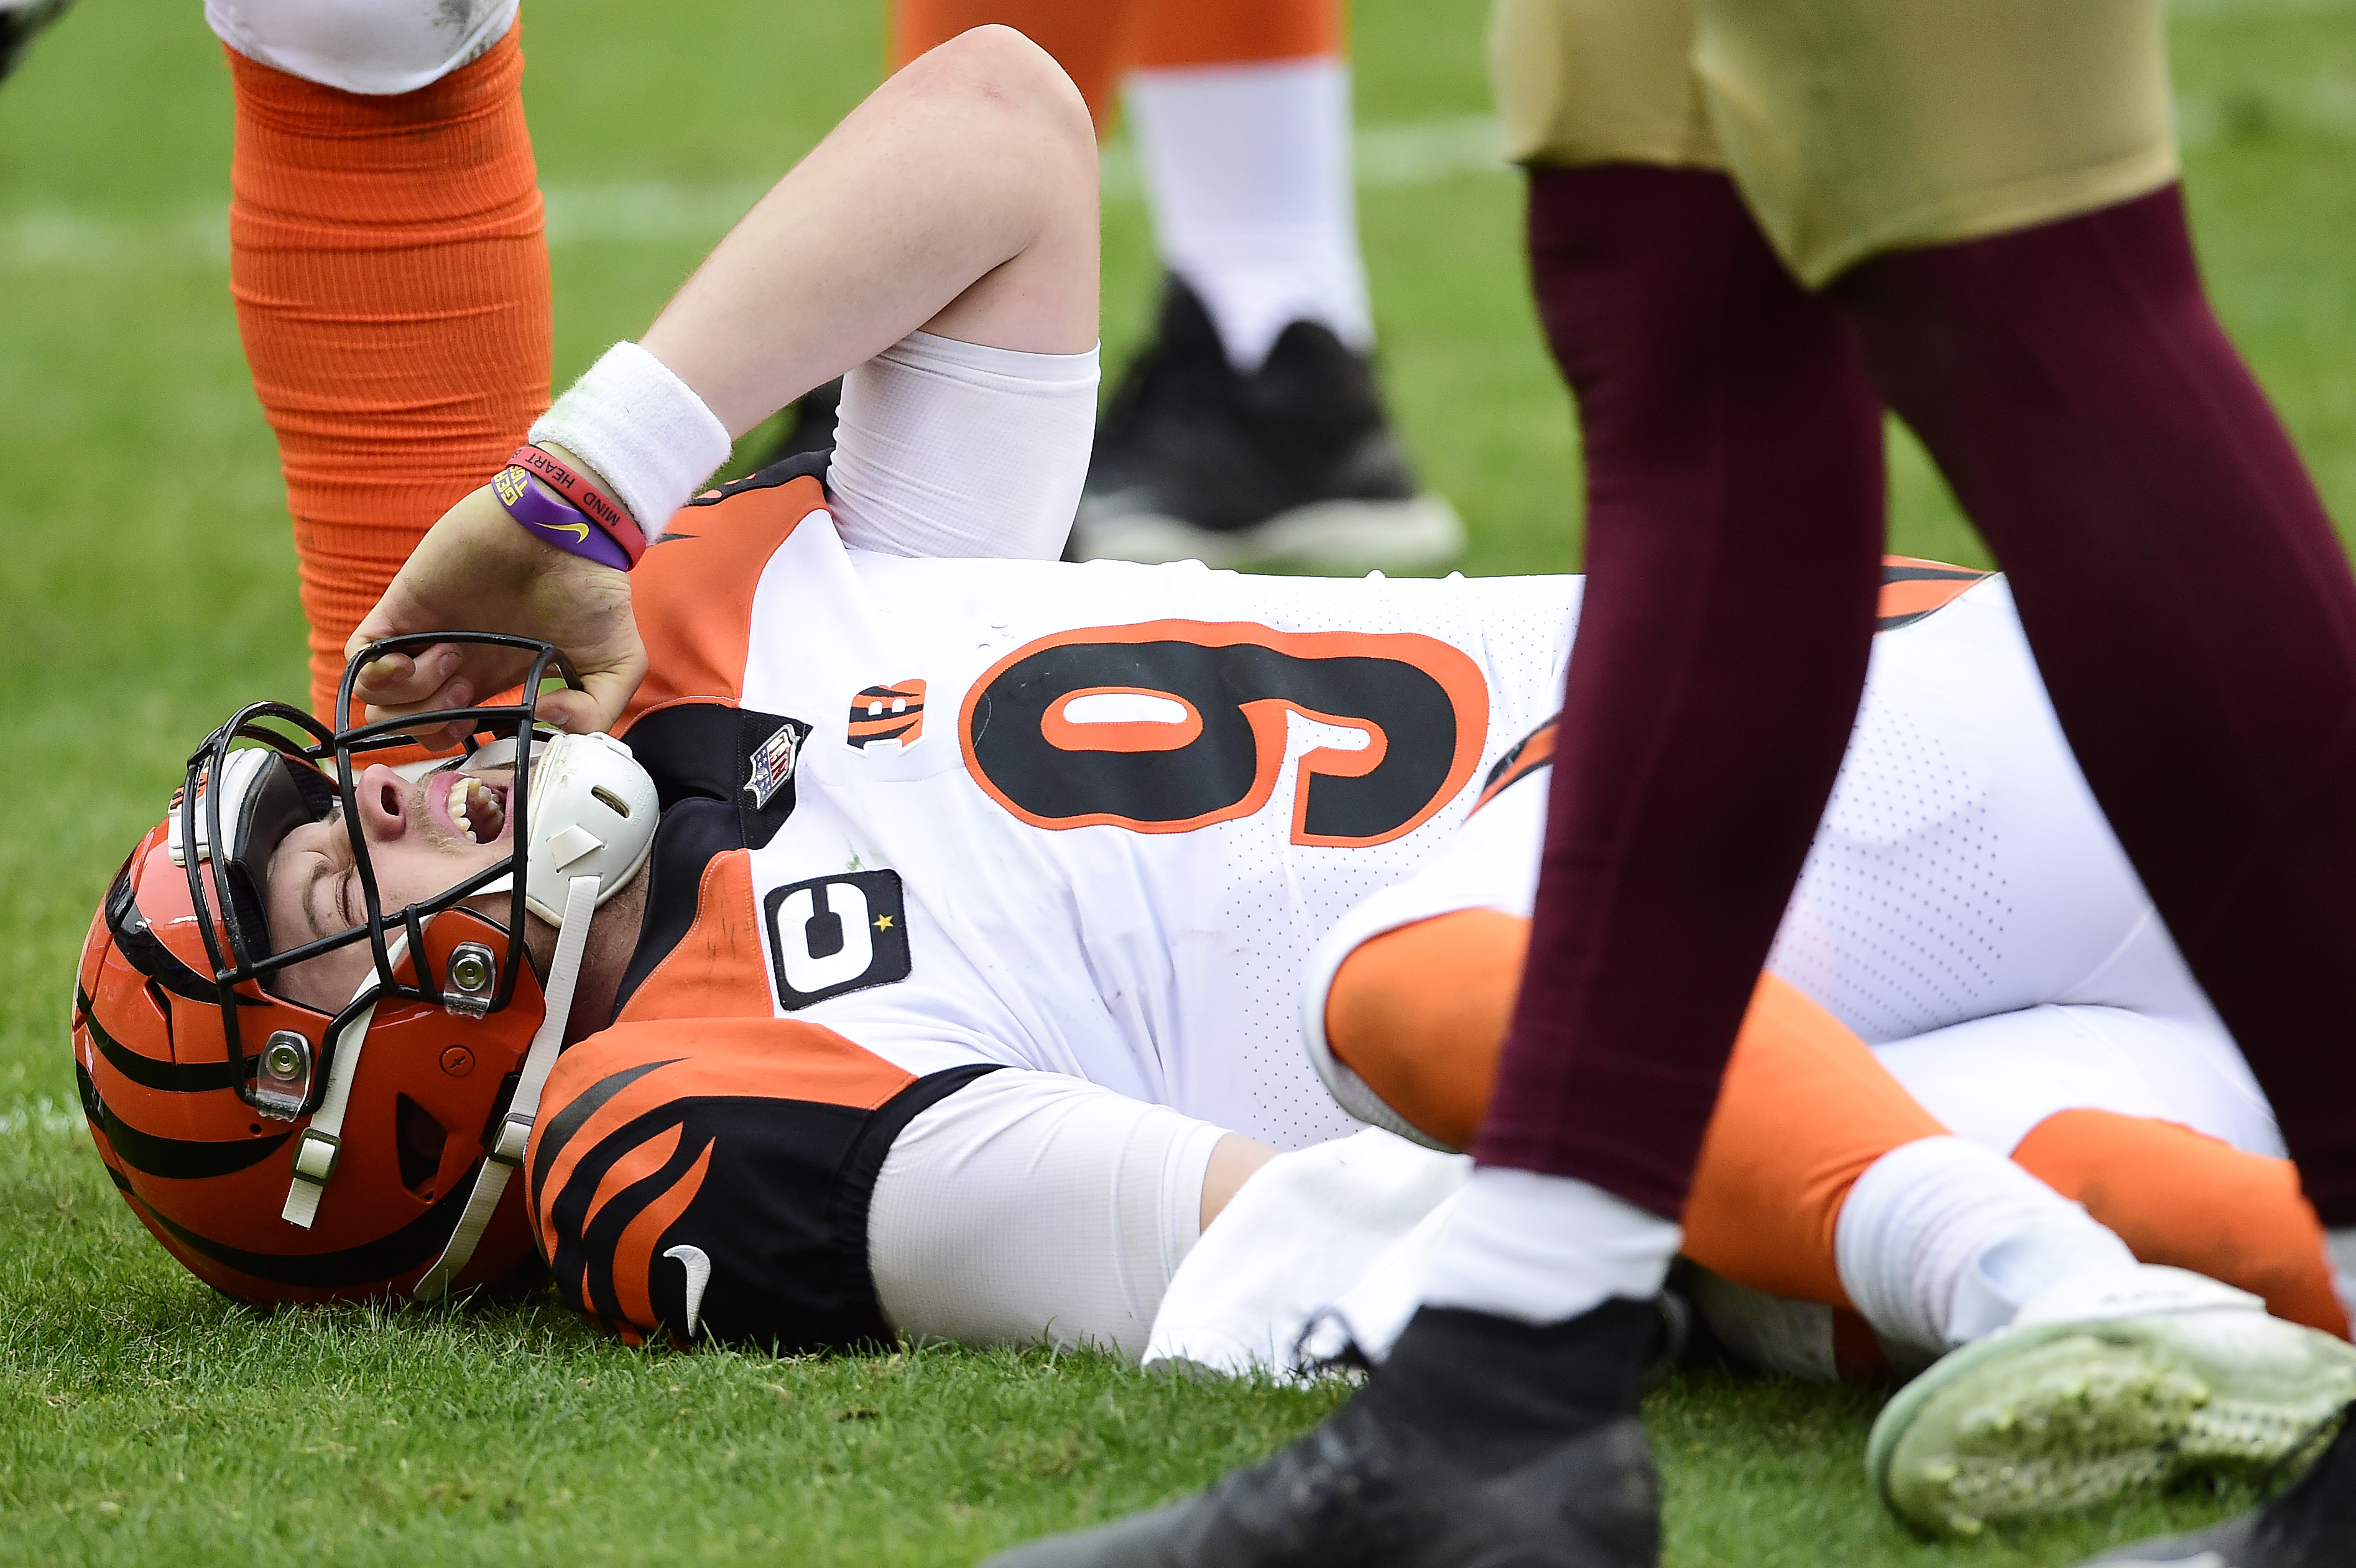 Joe Burrow of the Cincinnati Bengals reacts after injuring his left knee in the third quarter against the Washington Football Team at FedExField on November 22, 2020, in Landover, Maryland.